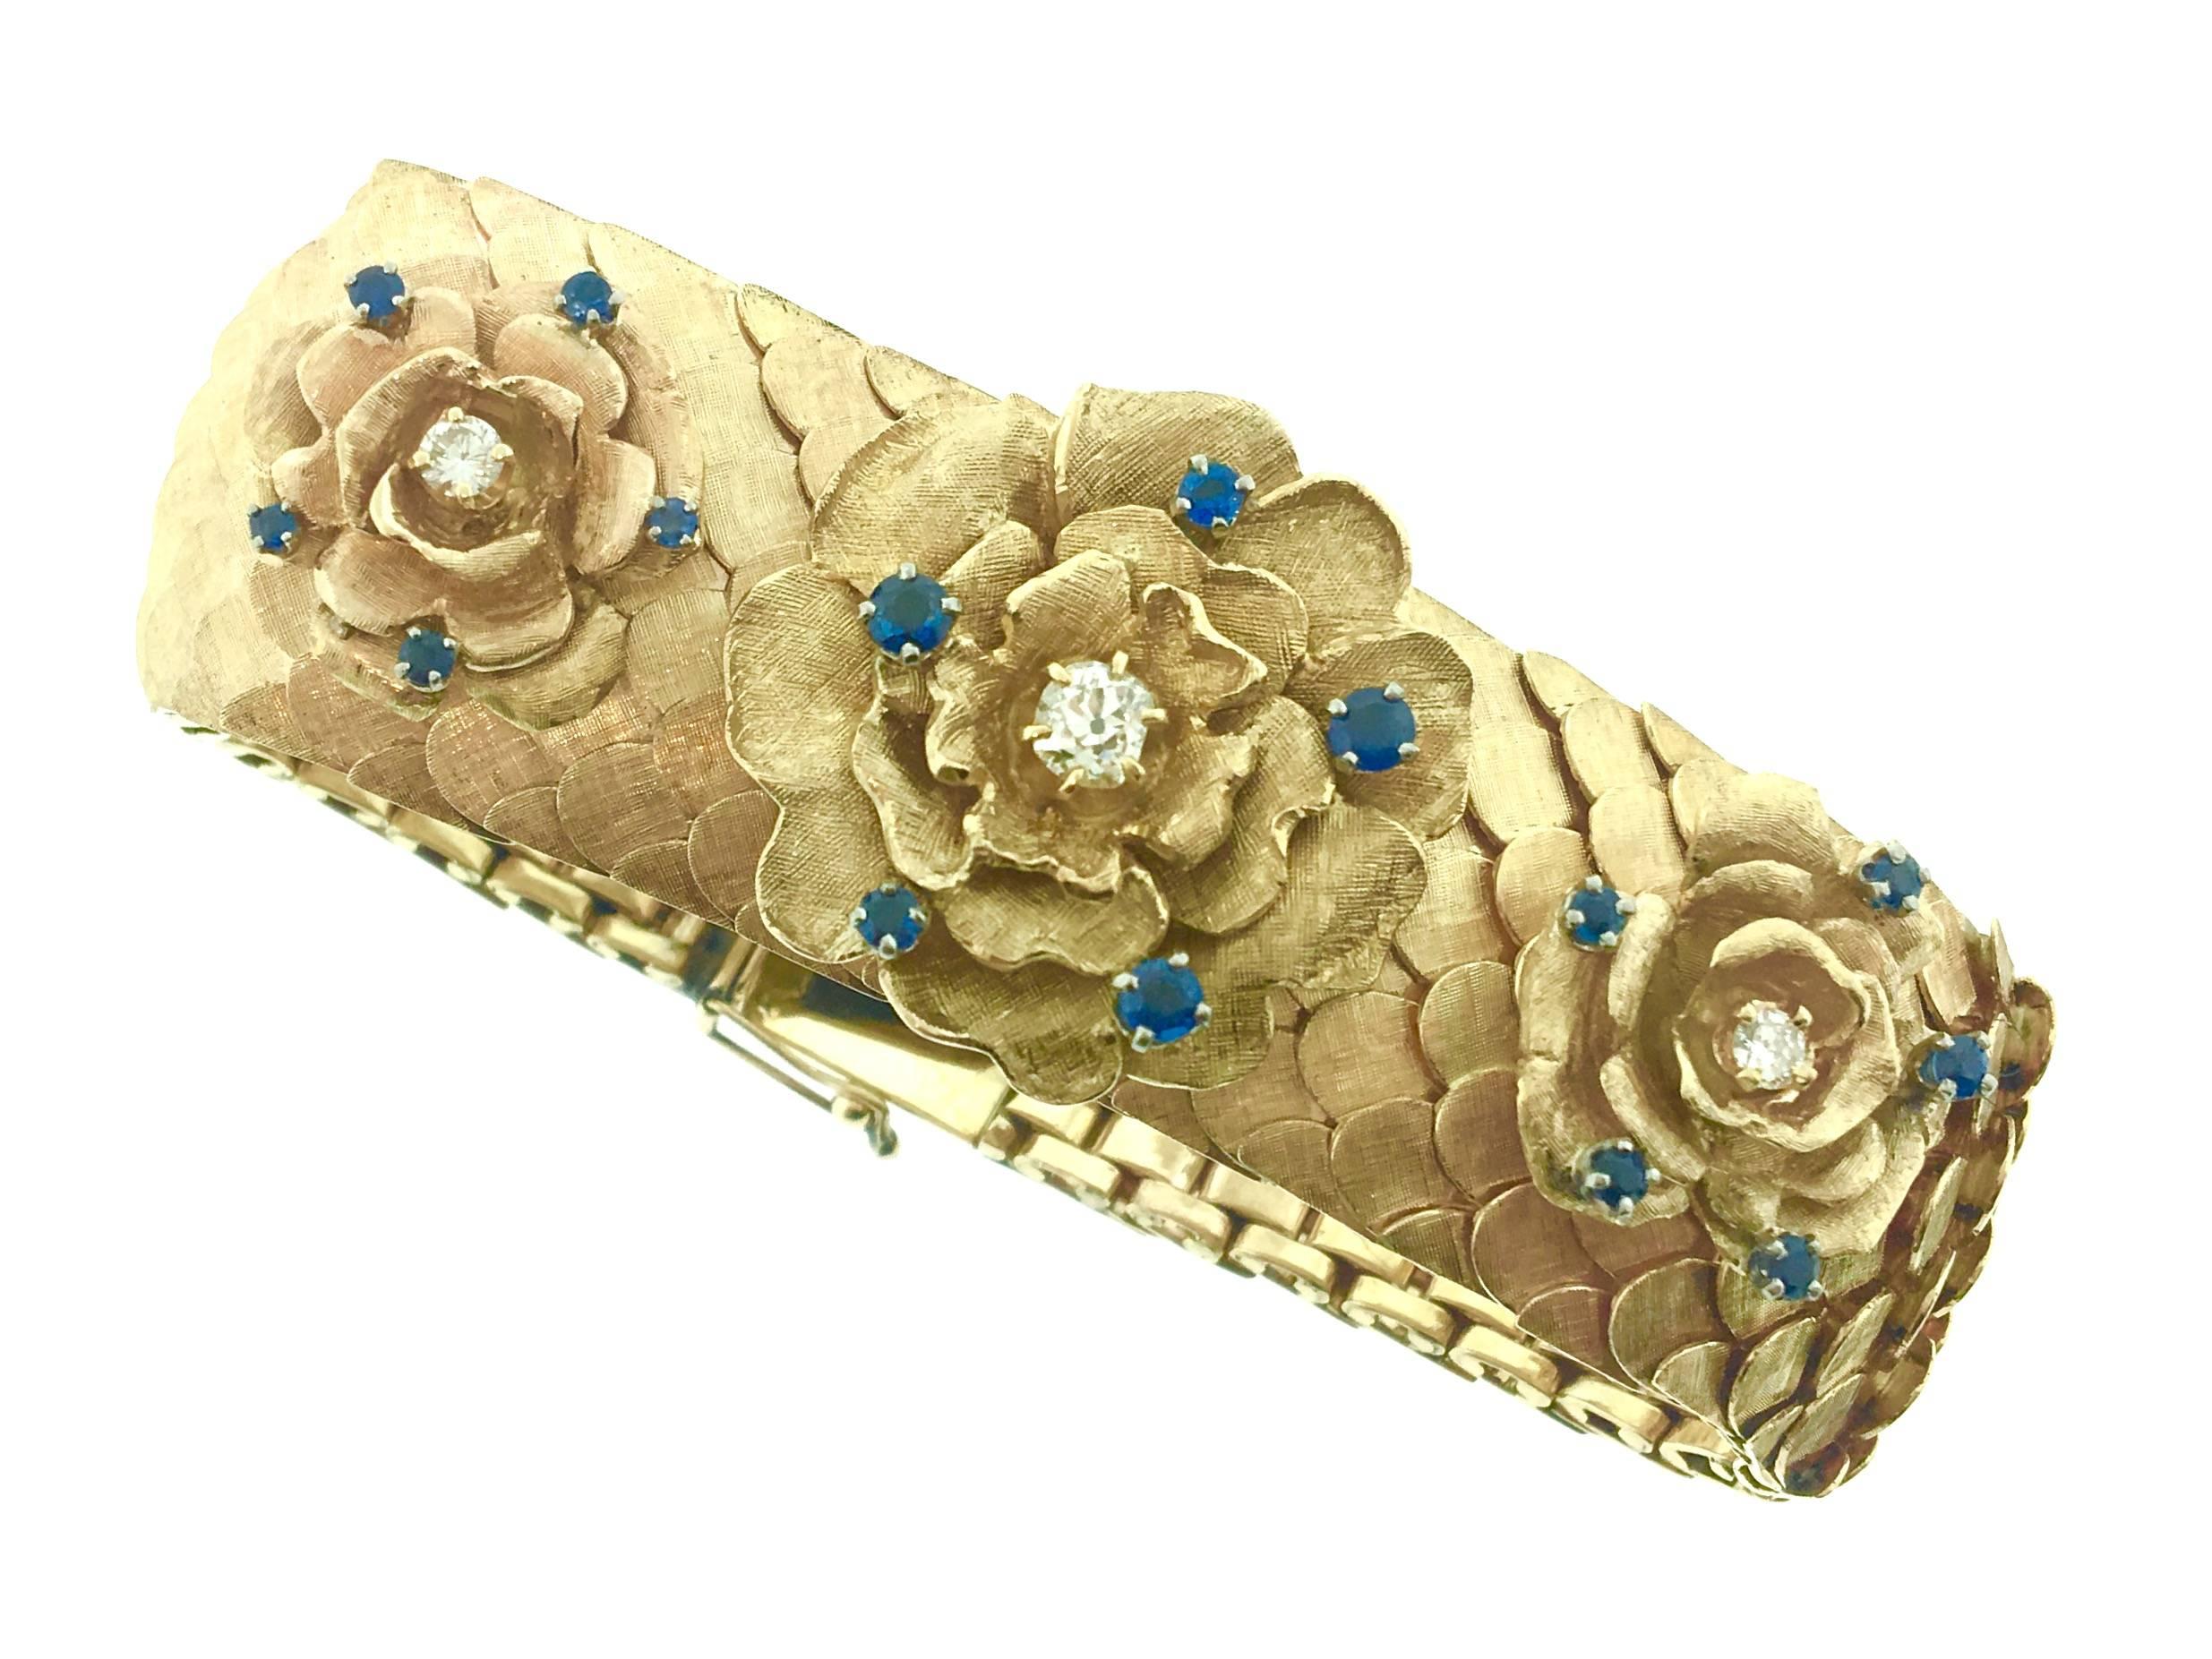 Flexible 1 inch wide Rose Gold Bracelet with textured scales and rose florets on the top. Each floret is studded with one diamond and 5 blue sapphires. Total diamond weight is estimated .50 carats. Total sapphire weight is estimated .85 carats.